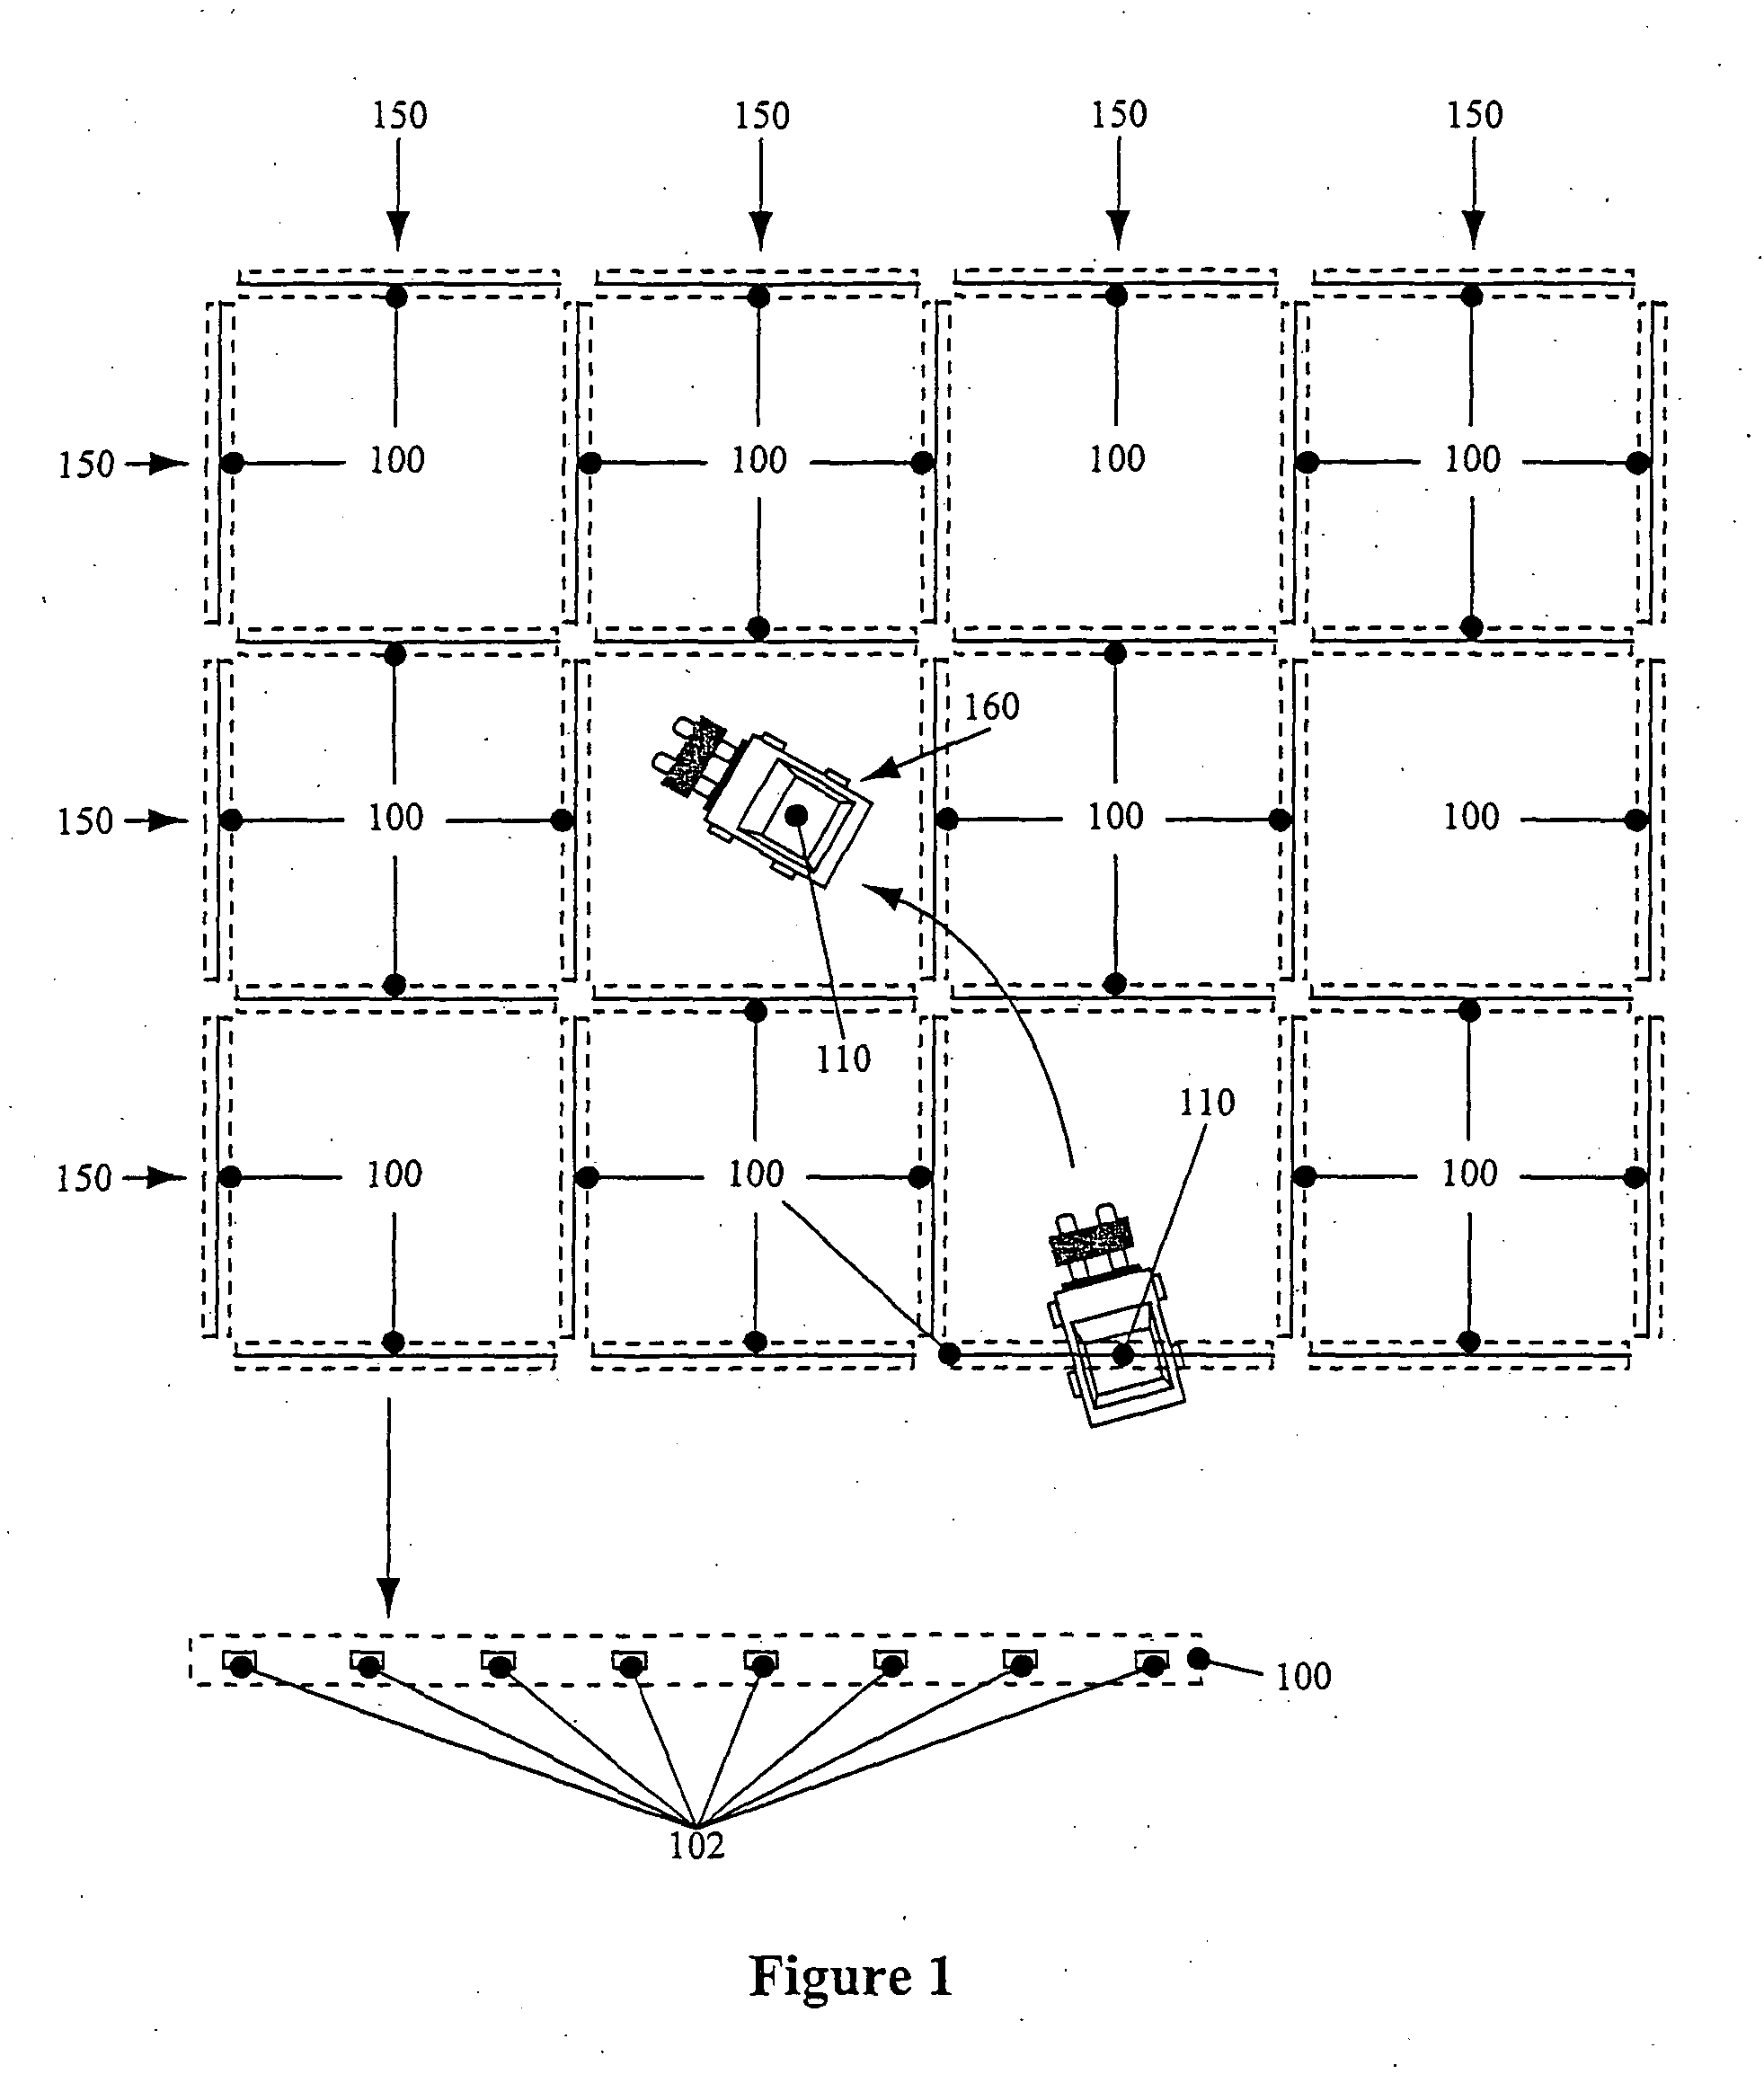 Systems and methods for configuring a warehouse for tracking the location of items within a controlled area